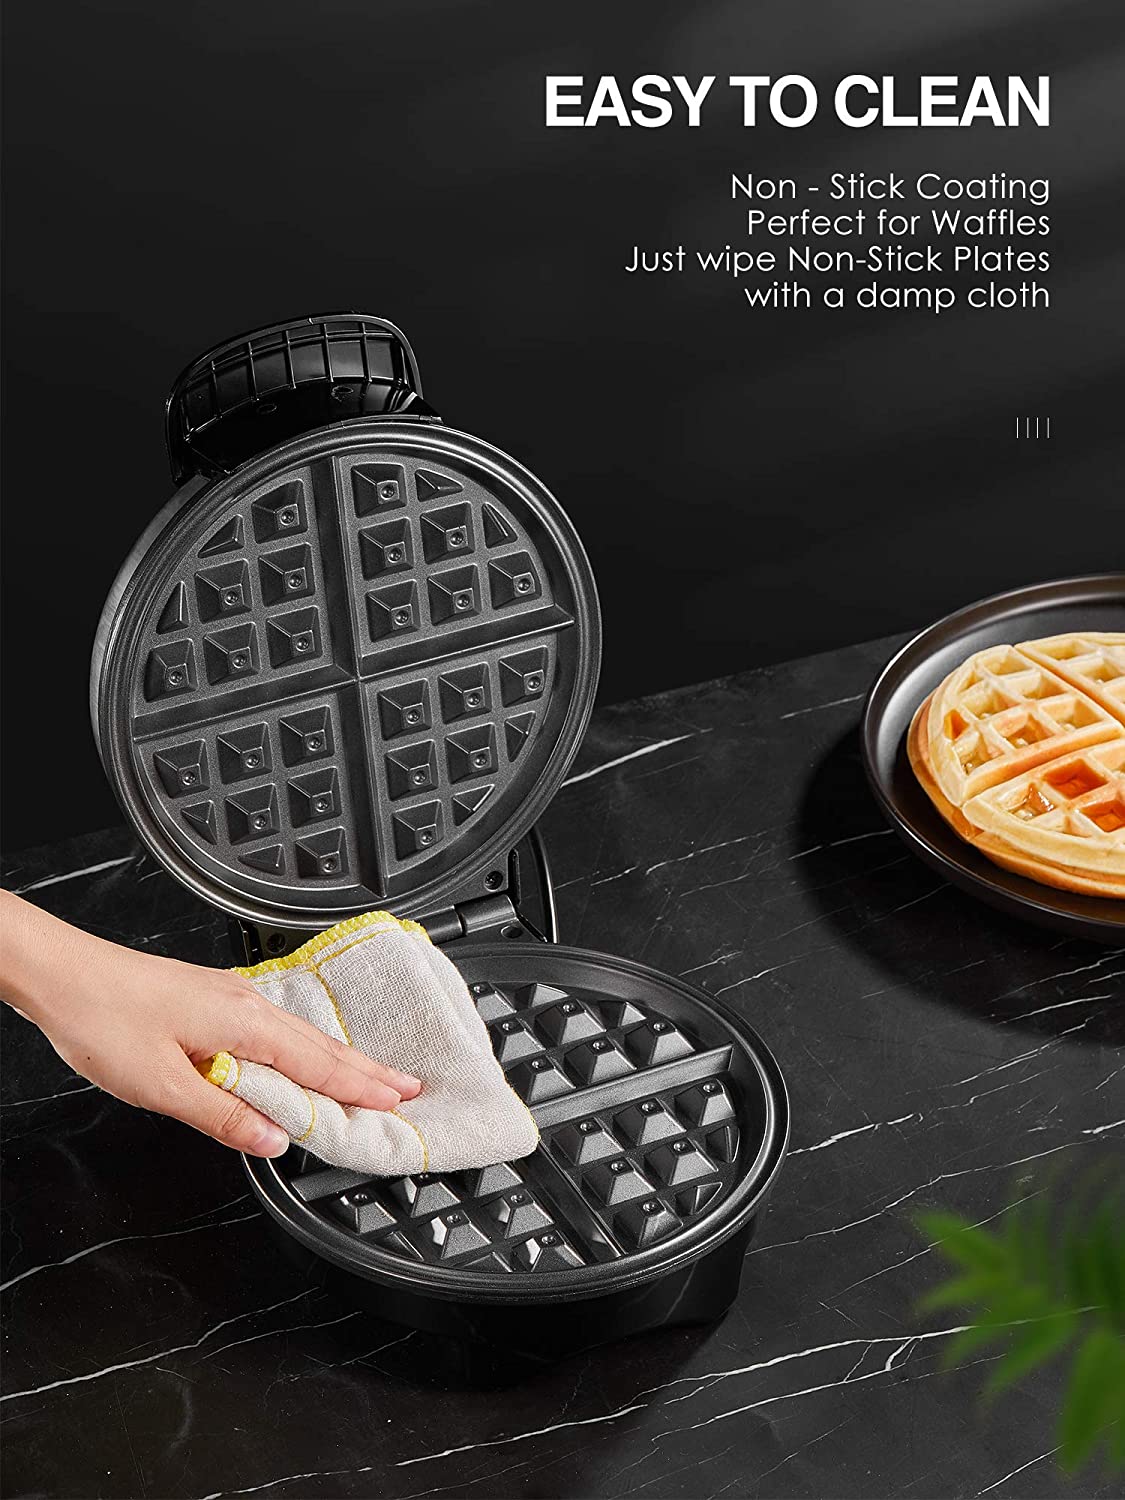 AICOOK | Waffle Maker Iron, Belgian Medium Waffle Iron, Stainless Steel, Adjustable Temperature Dial, Nonstick Plates, Easy To Clean